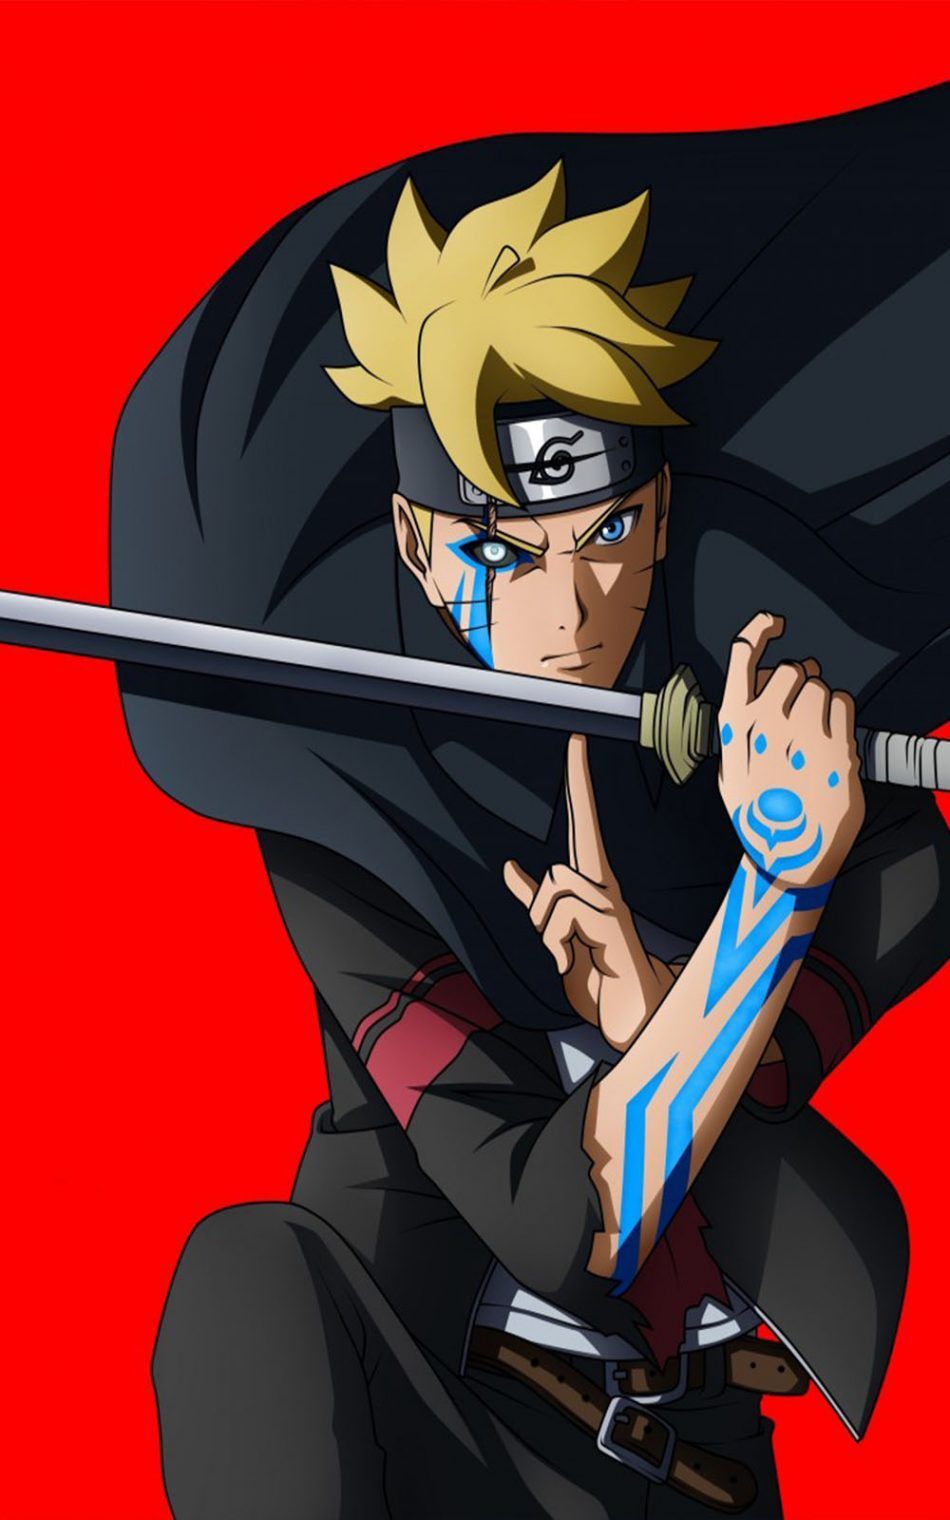 4k Naruto posted by John Sellers